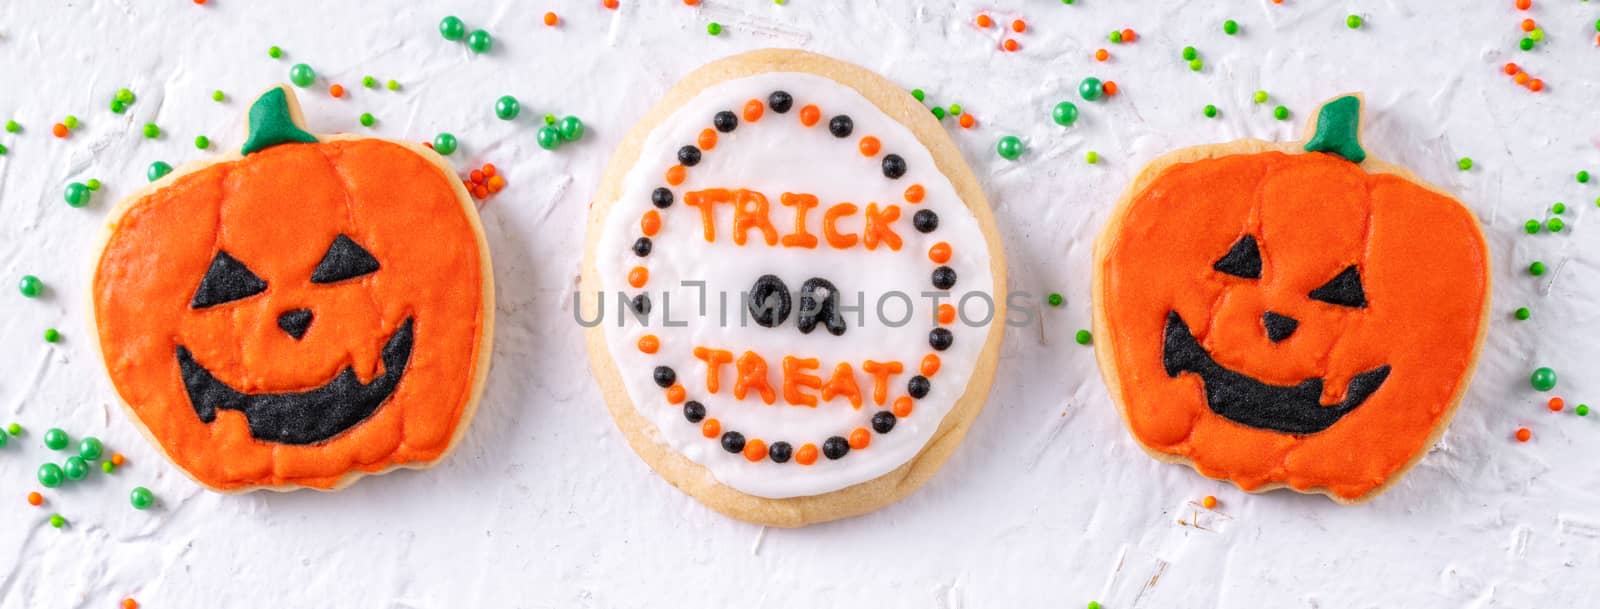 Top view of Halloween festive decorated icing sugar cookies on w by ROMIXIMAGE